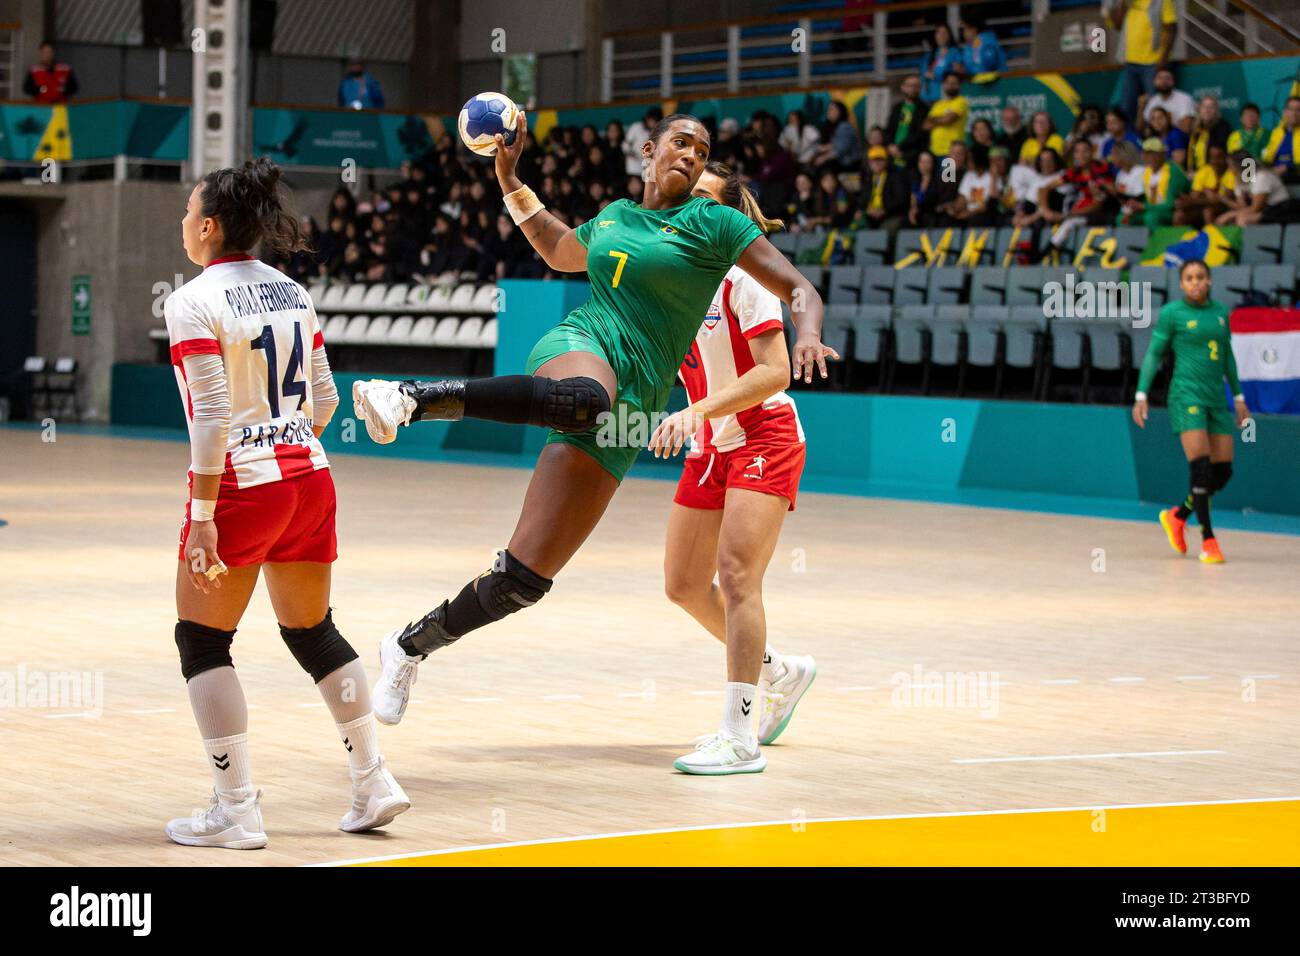 VINÃ DEL MAR, CH - 24.10.2023: JOGOS PANAMERICANOS SANTIAGO 2023 - Brazil's  27-15 victory over the Paraguay team in the first round of Women's Handball  during the Santiago 2023 Pan American Games